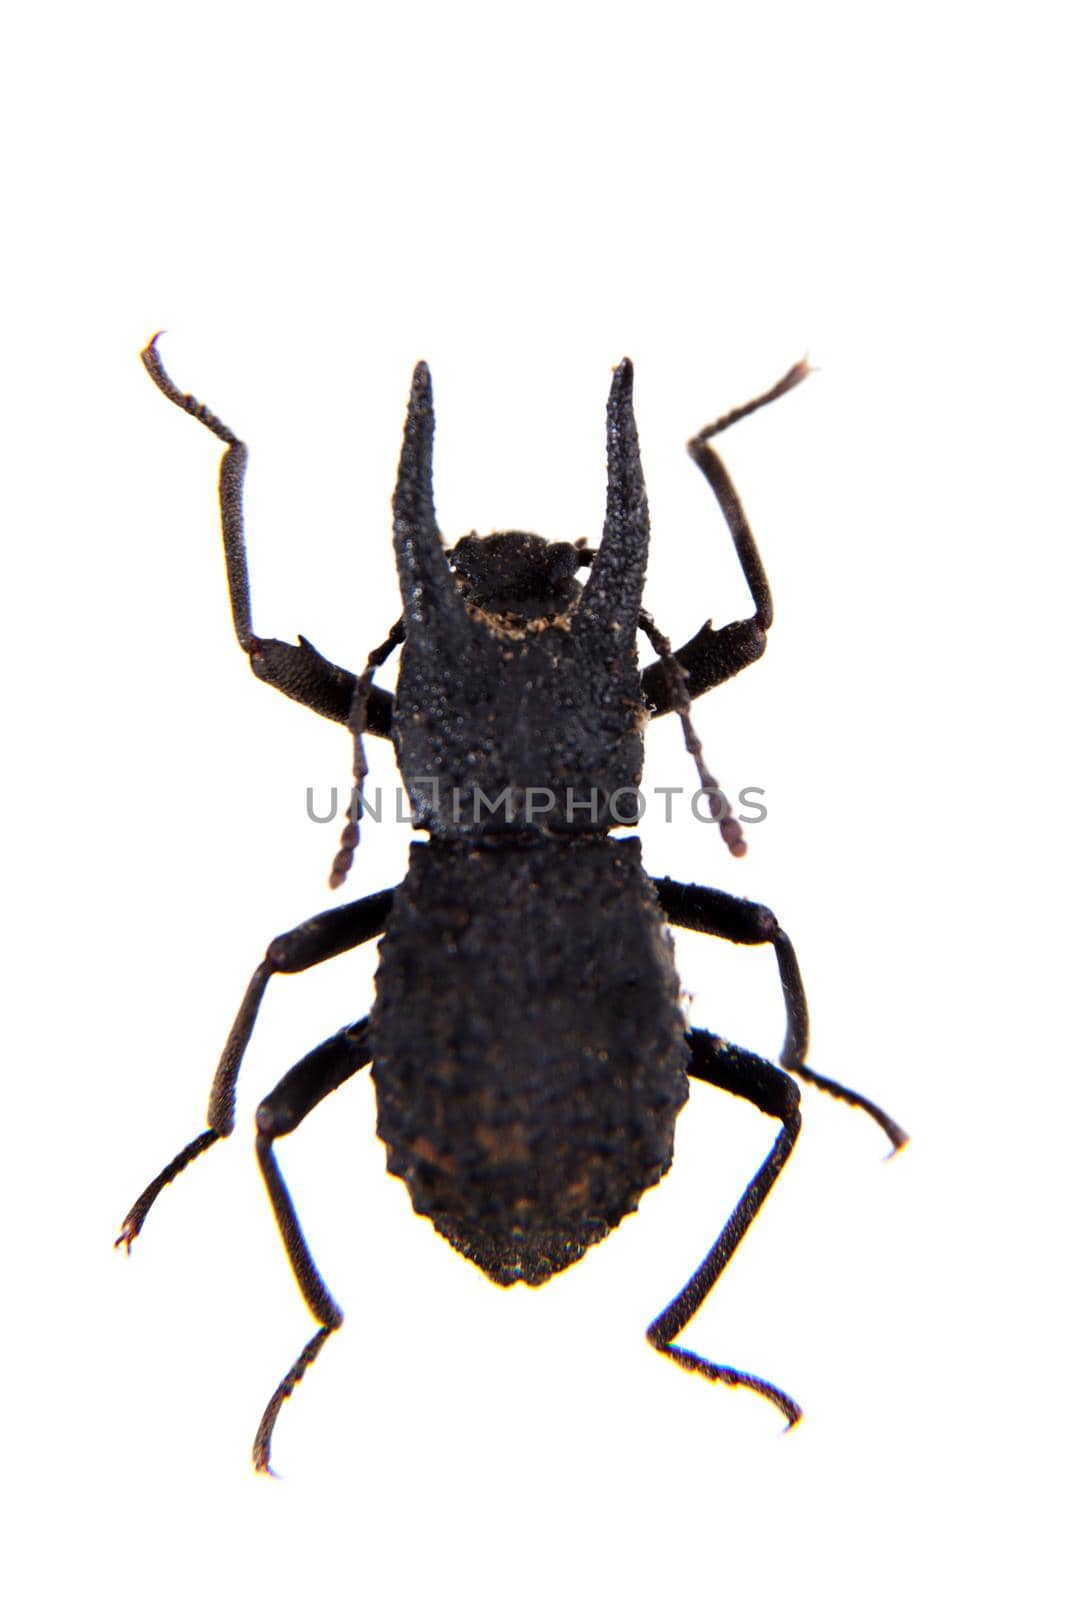 Carabus beetle on the white background by RosaJay